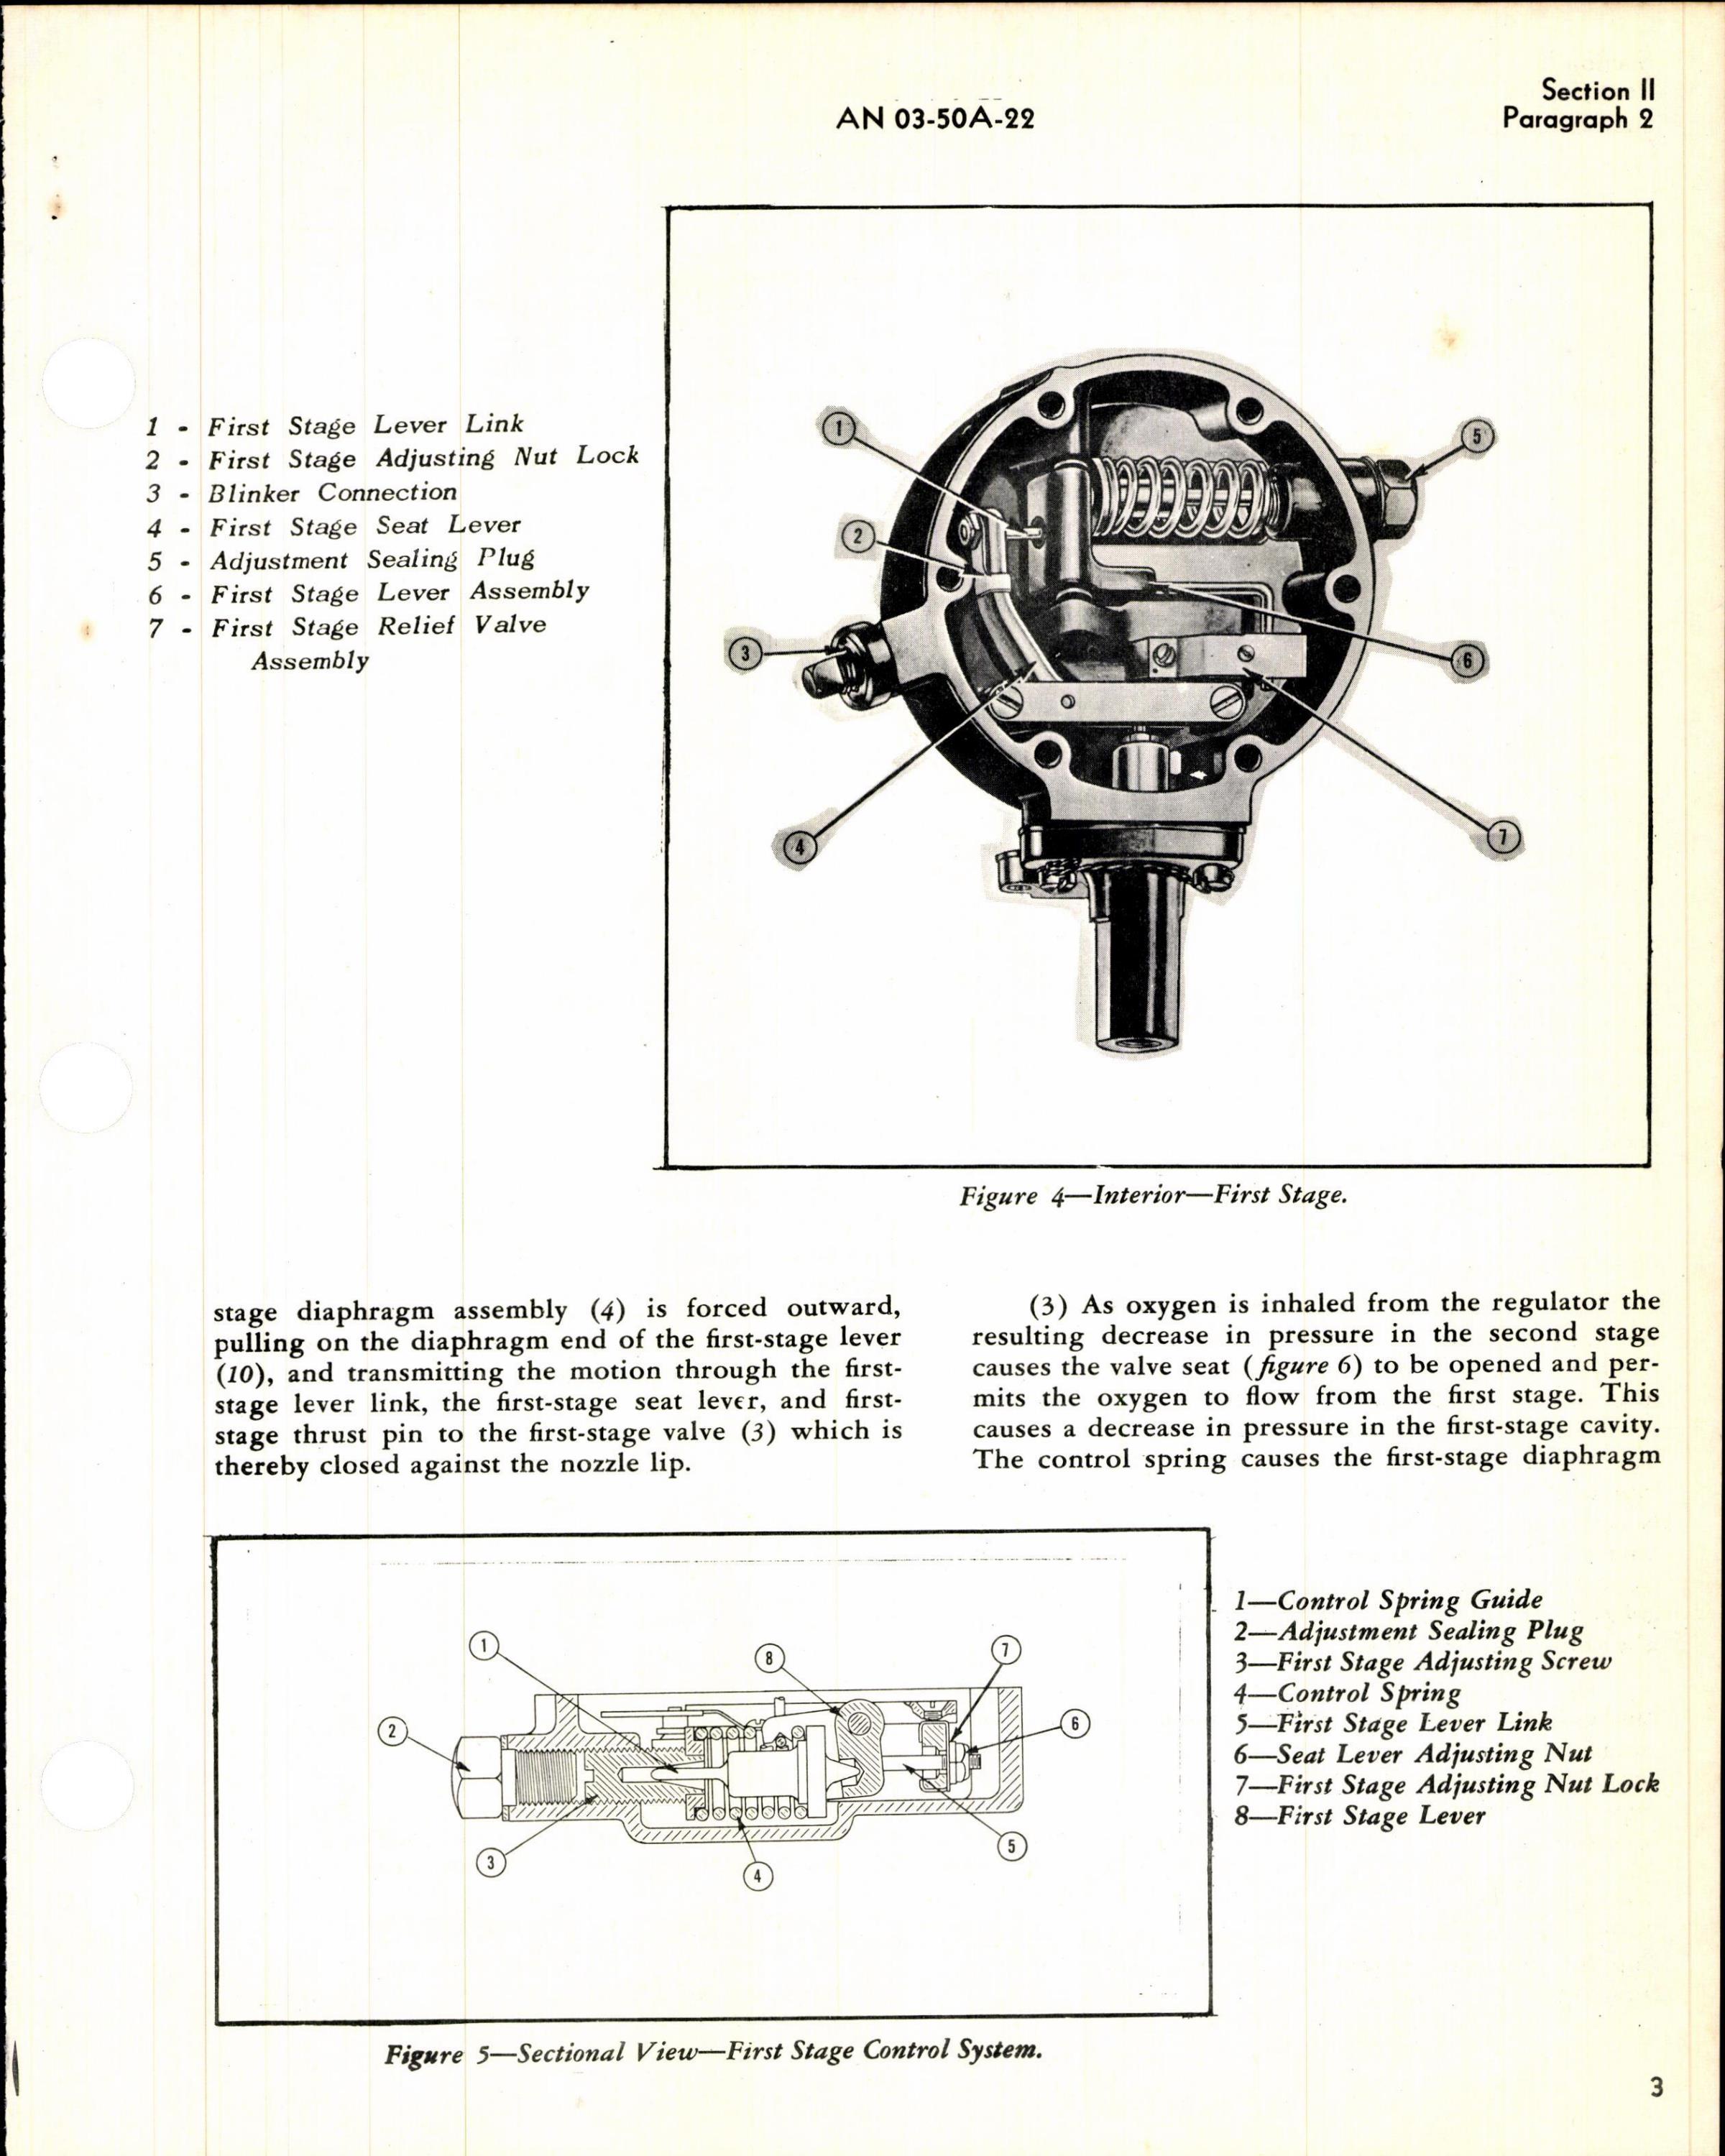 Sample page 3 from AirCorps Library document: Operation, Service, & Overhaul Inst w/ Parts Catalog for Pressure Breathing Diluter Demand Oxygen Regulator Type A-14